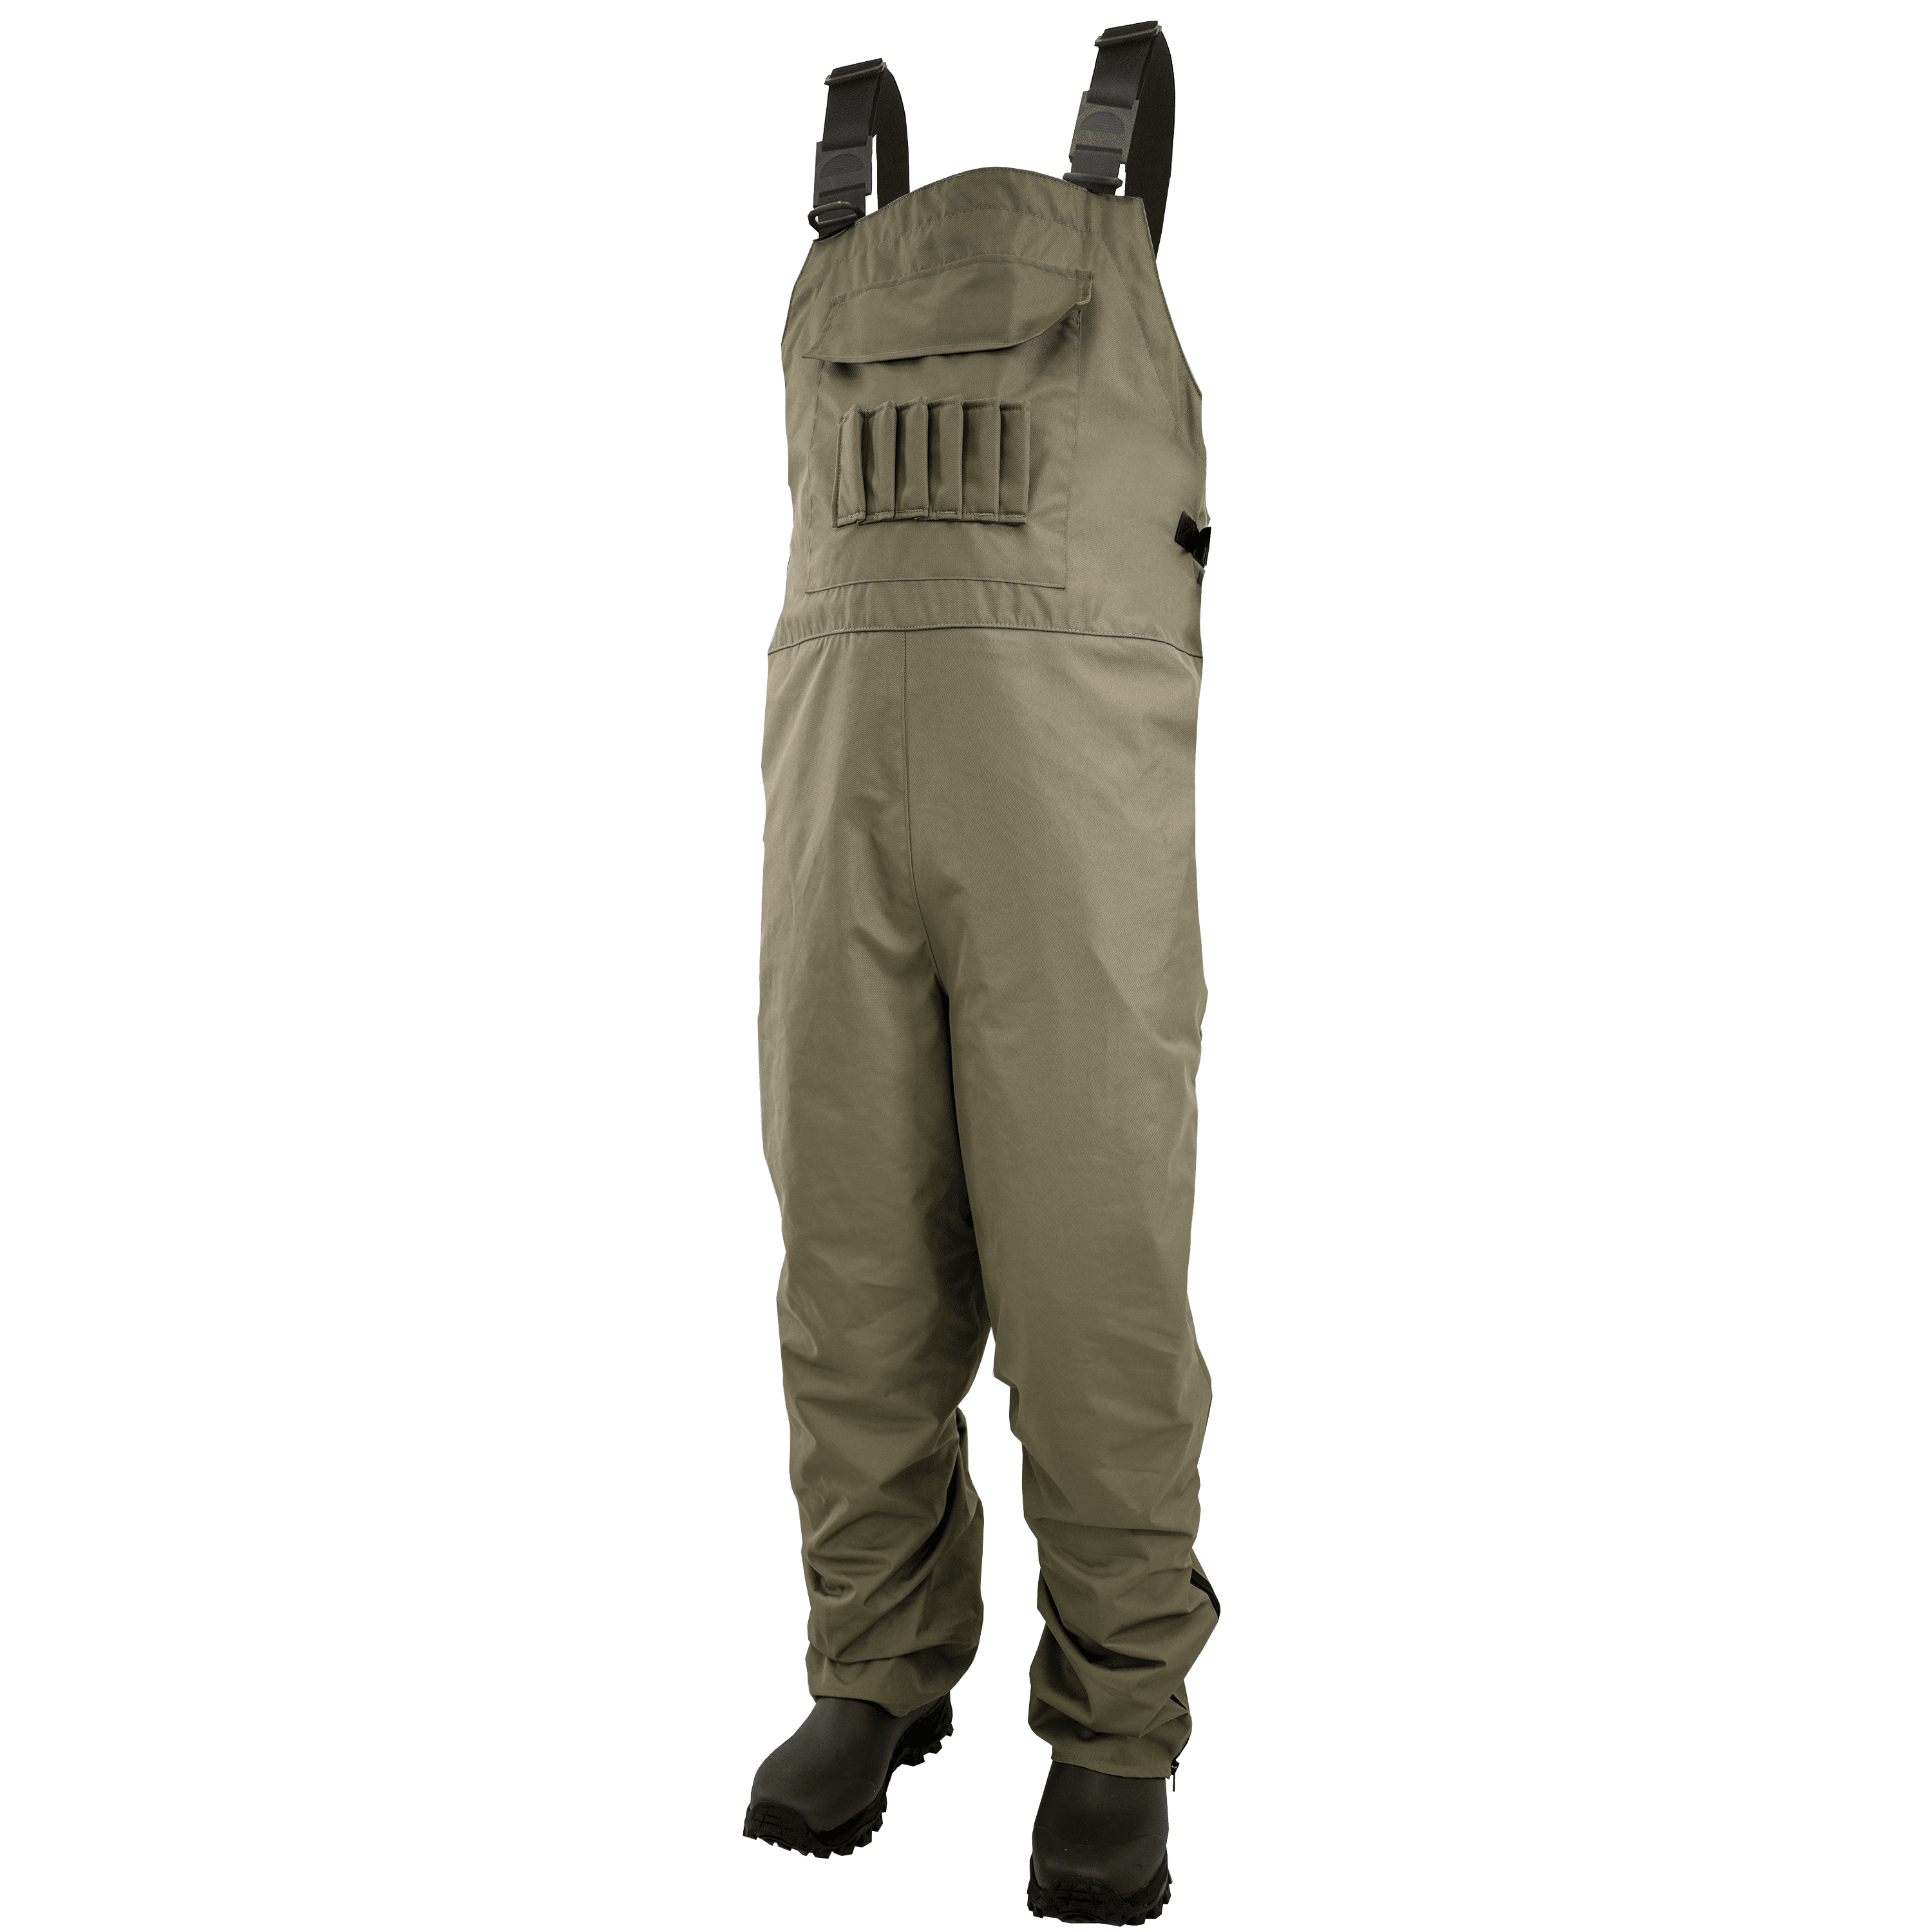 Frogg Toggs Brush Hogg Bootfoot Chest Wader - Size 10 